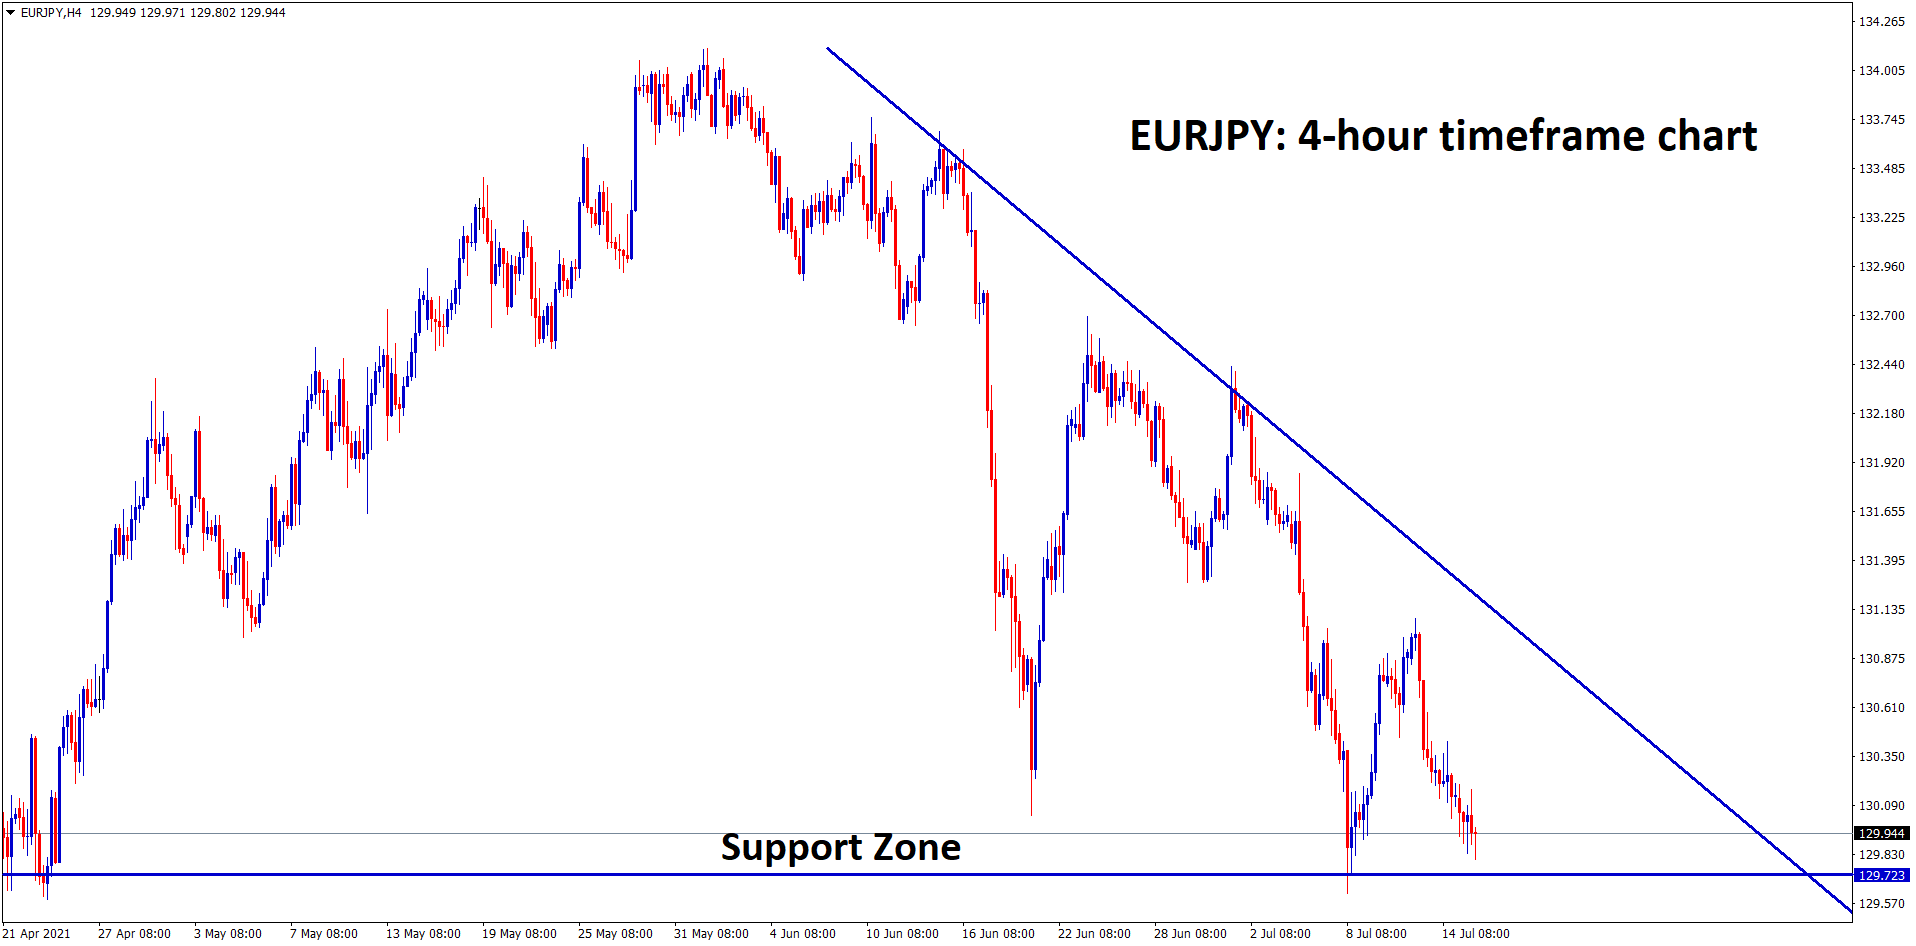 EURJPY landed to the support zone in the 4 hour timeframe chart